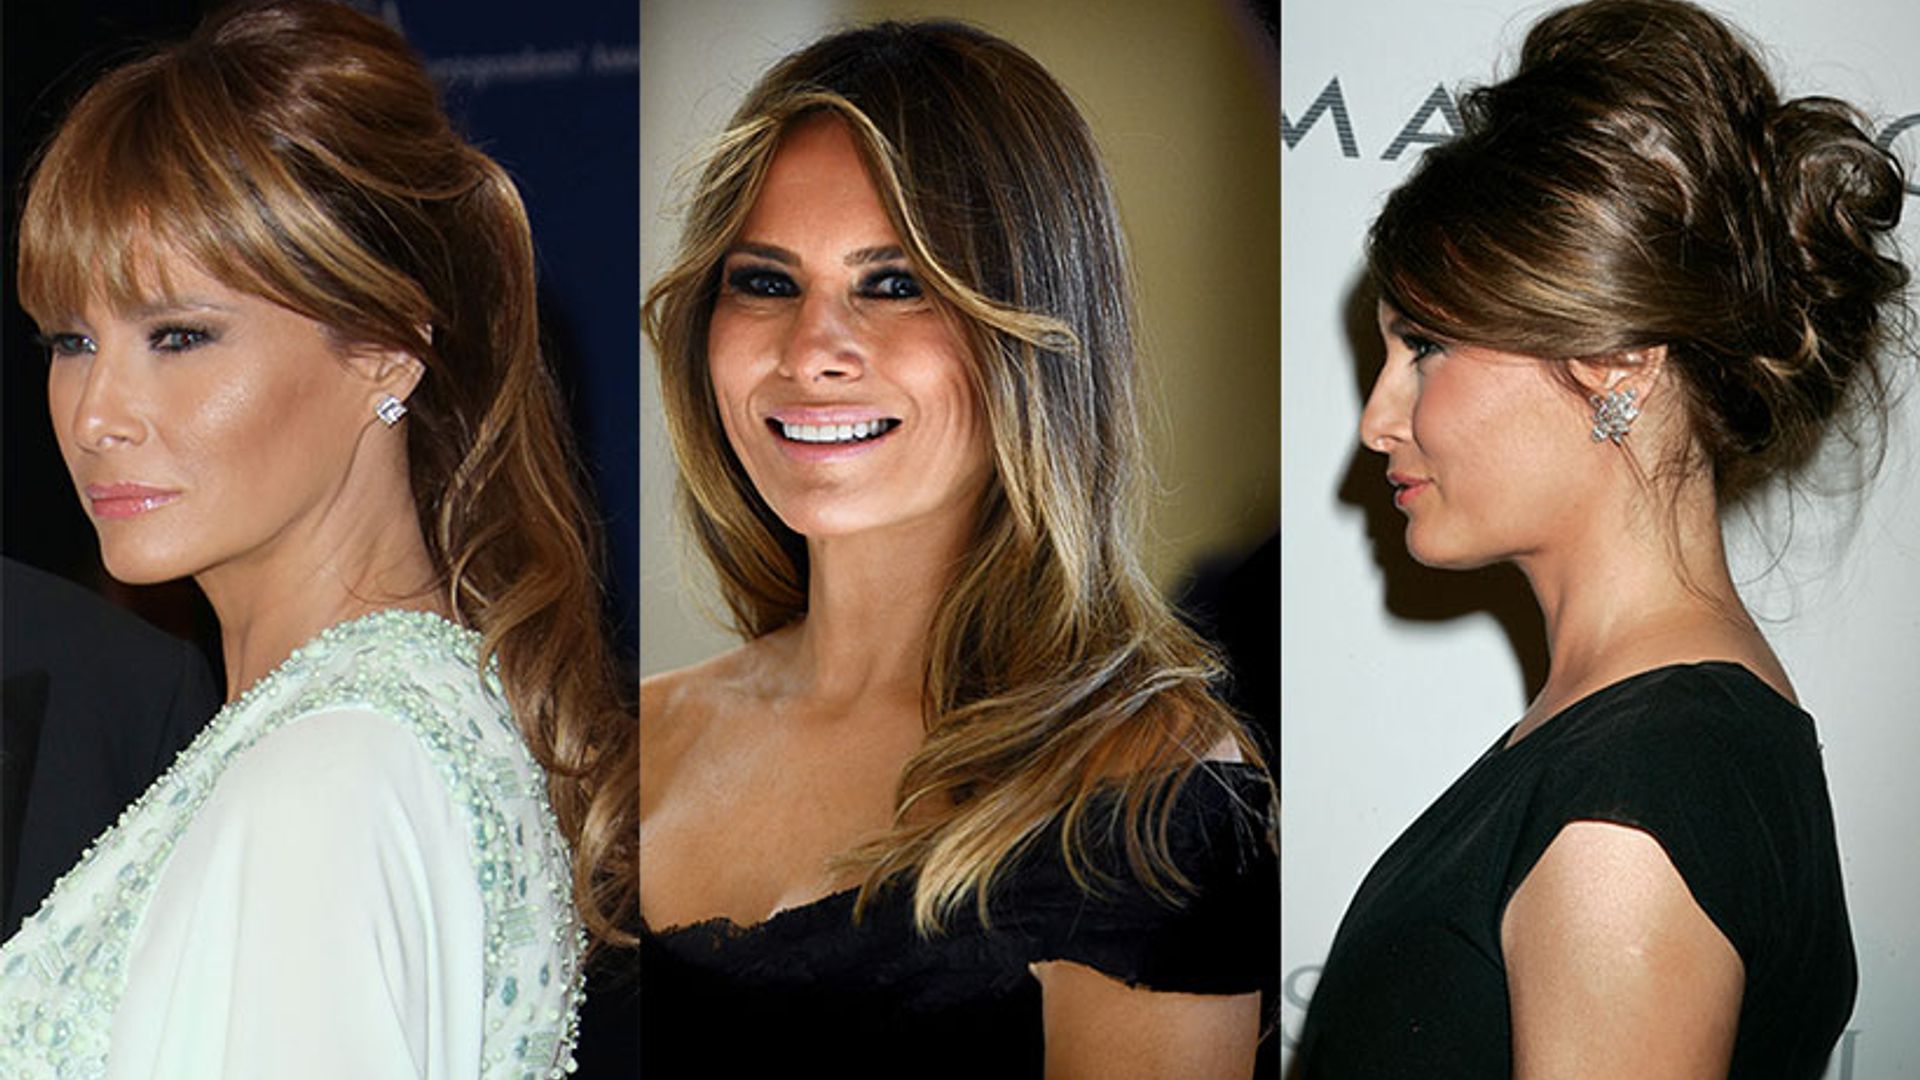 A look at Melania Trump's best hairstyles to date...